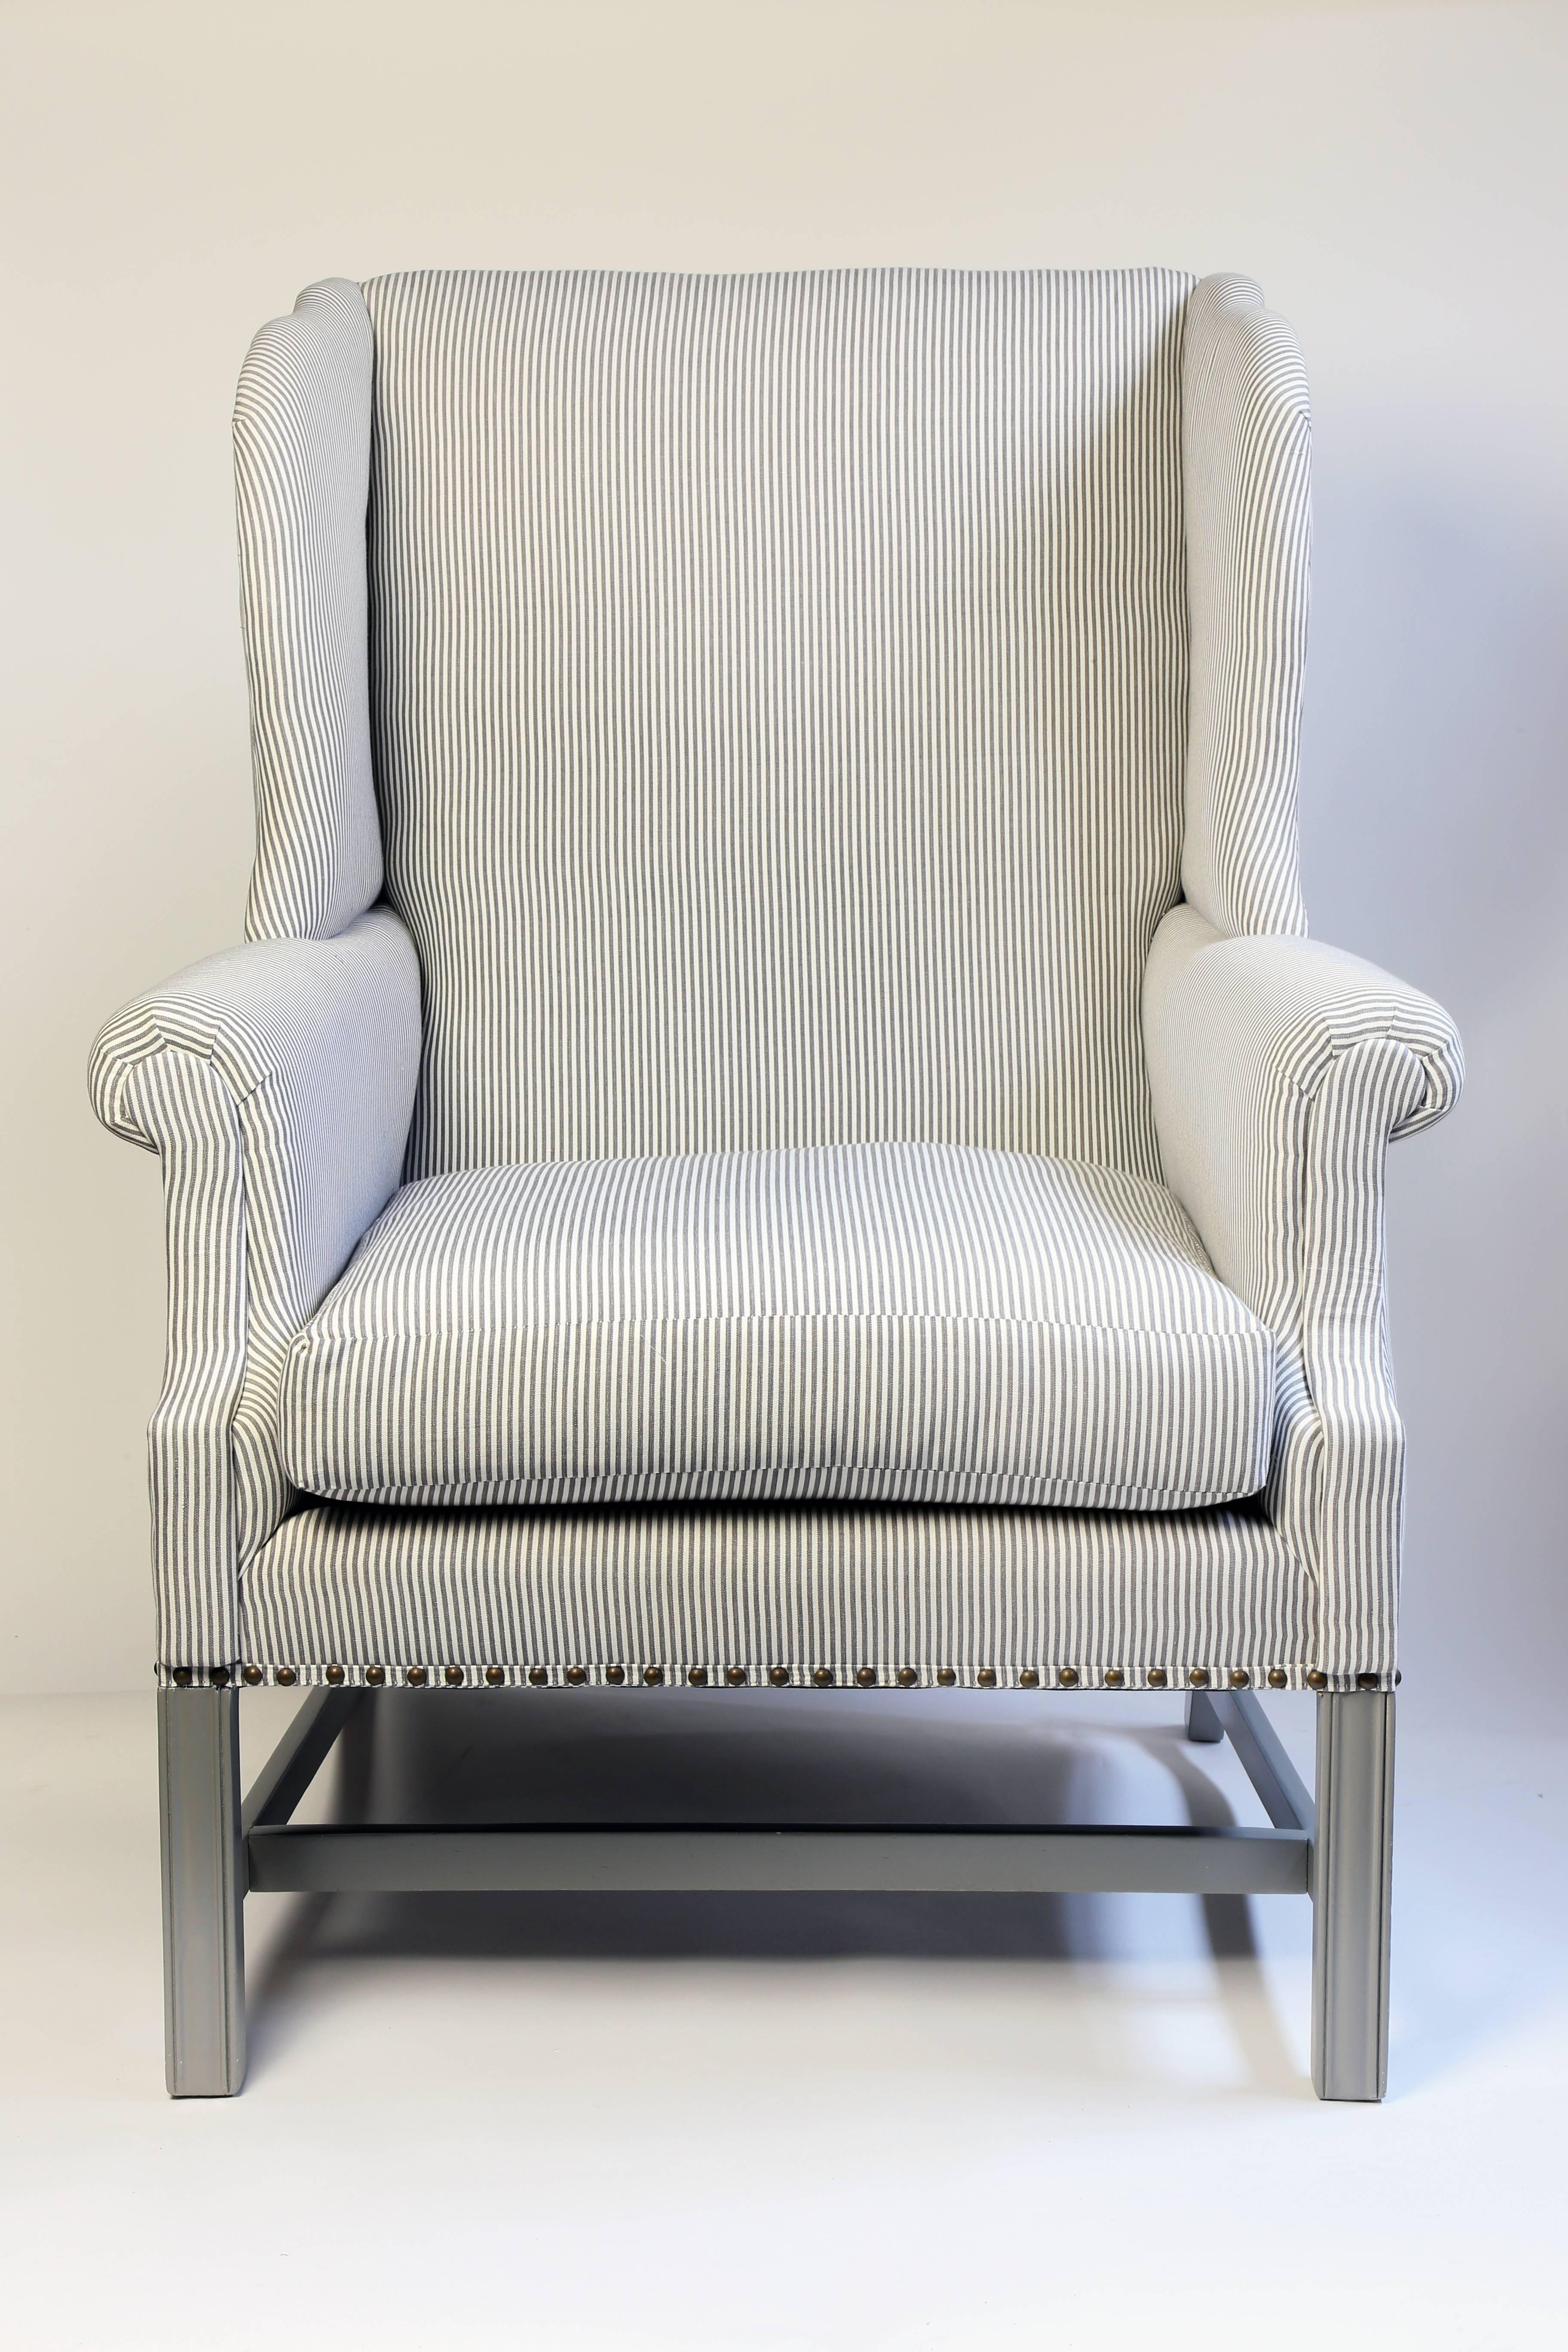 The newly upholstered wingback chairs have been upholstered in a cotton ticking stripe by Romo with a self tape and nailhead detail. The legs and stretchers have been painted to match the stripe.